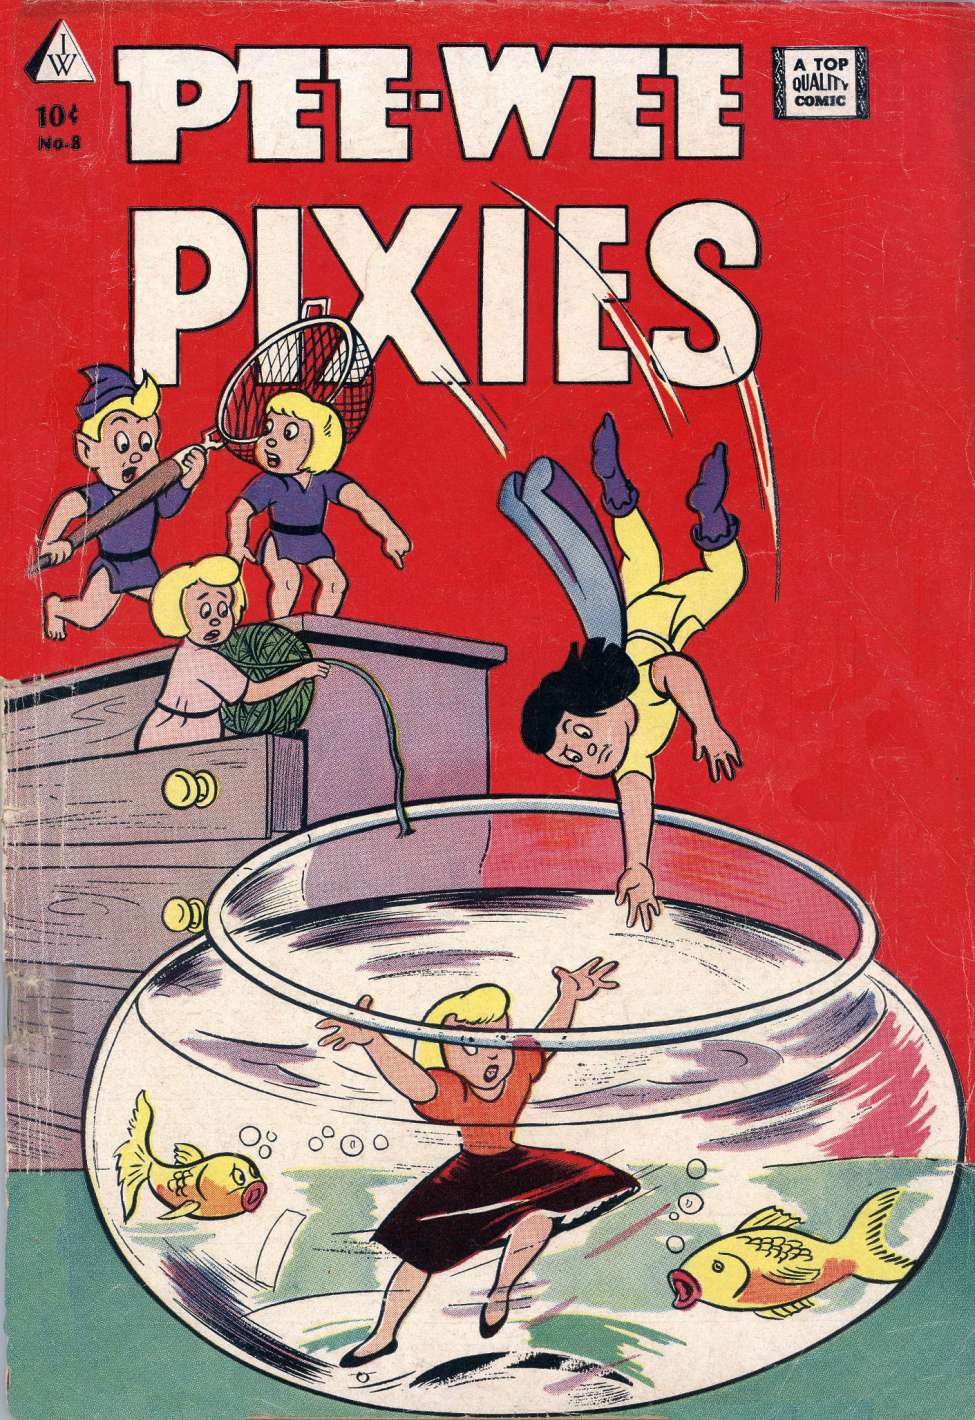 Book Cover For Pee-Wee Pixies 8